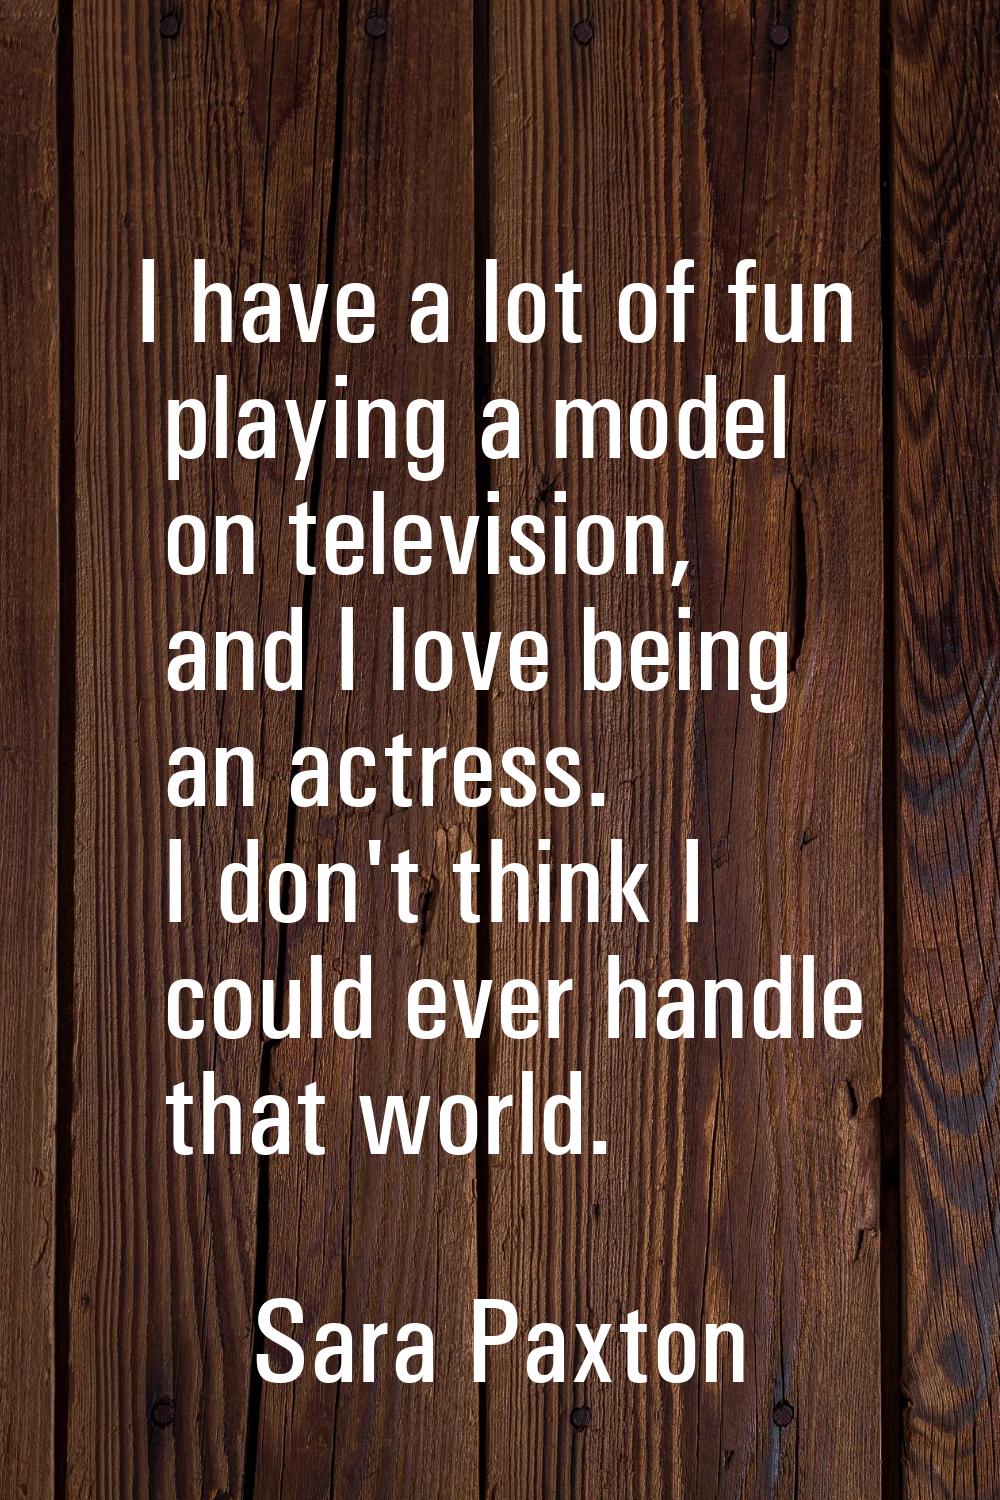 I have a lot of fun playing a model on television, and I love being an actress. I don't think I cou